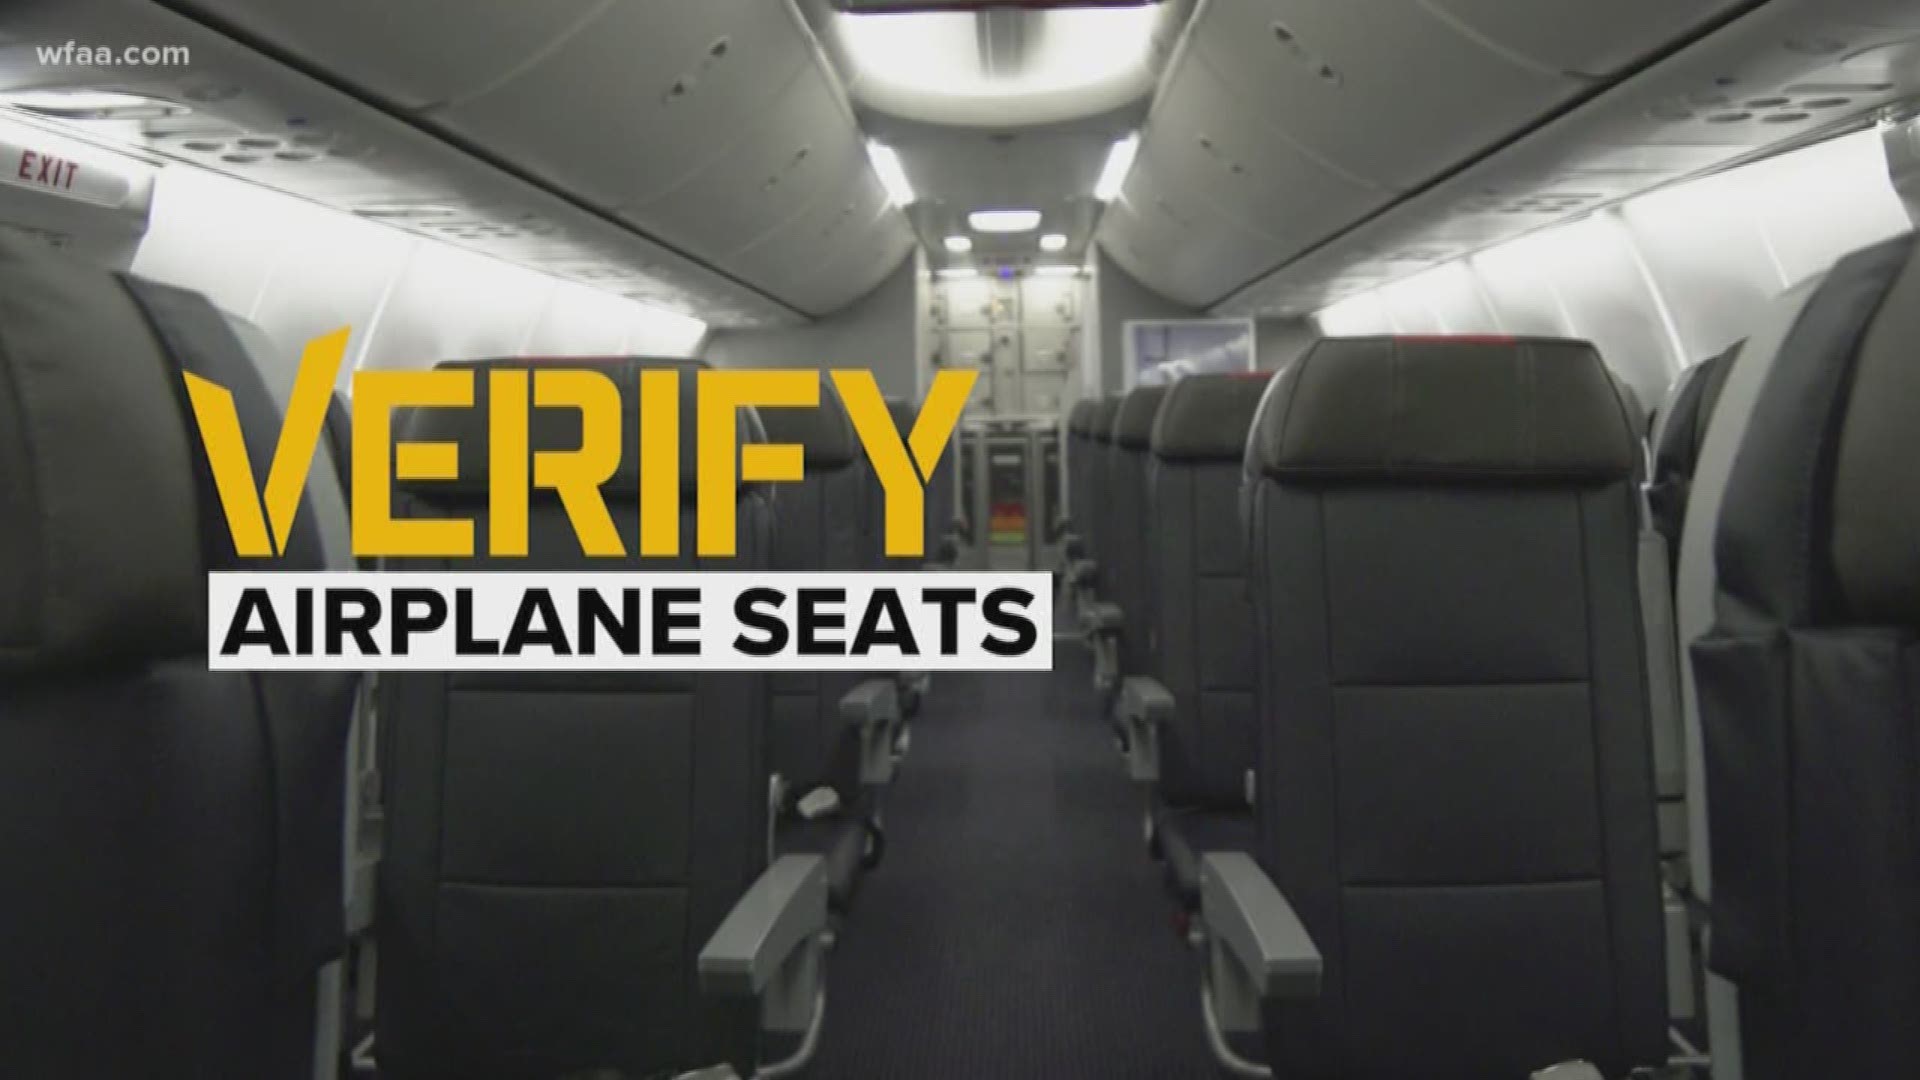 Verify: Is there a safety reason for putting your airplane seat in the upright position?